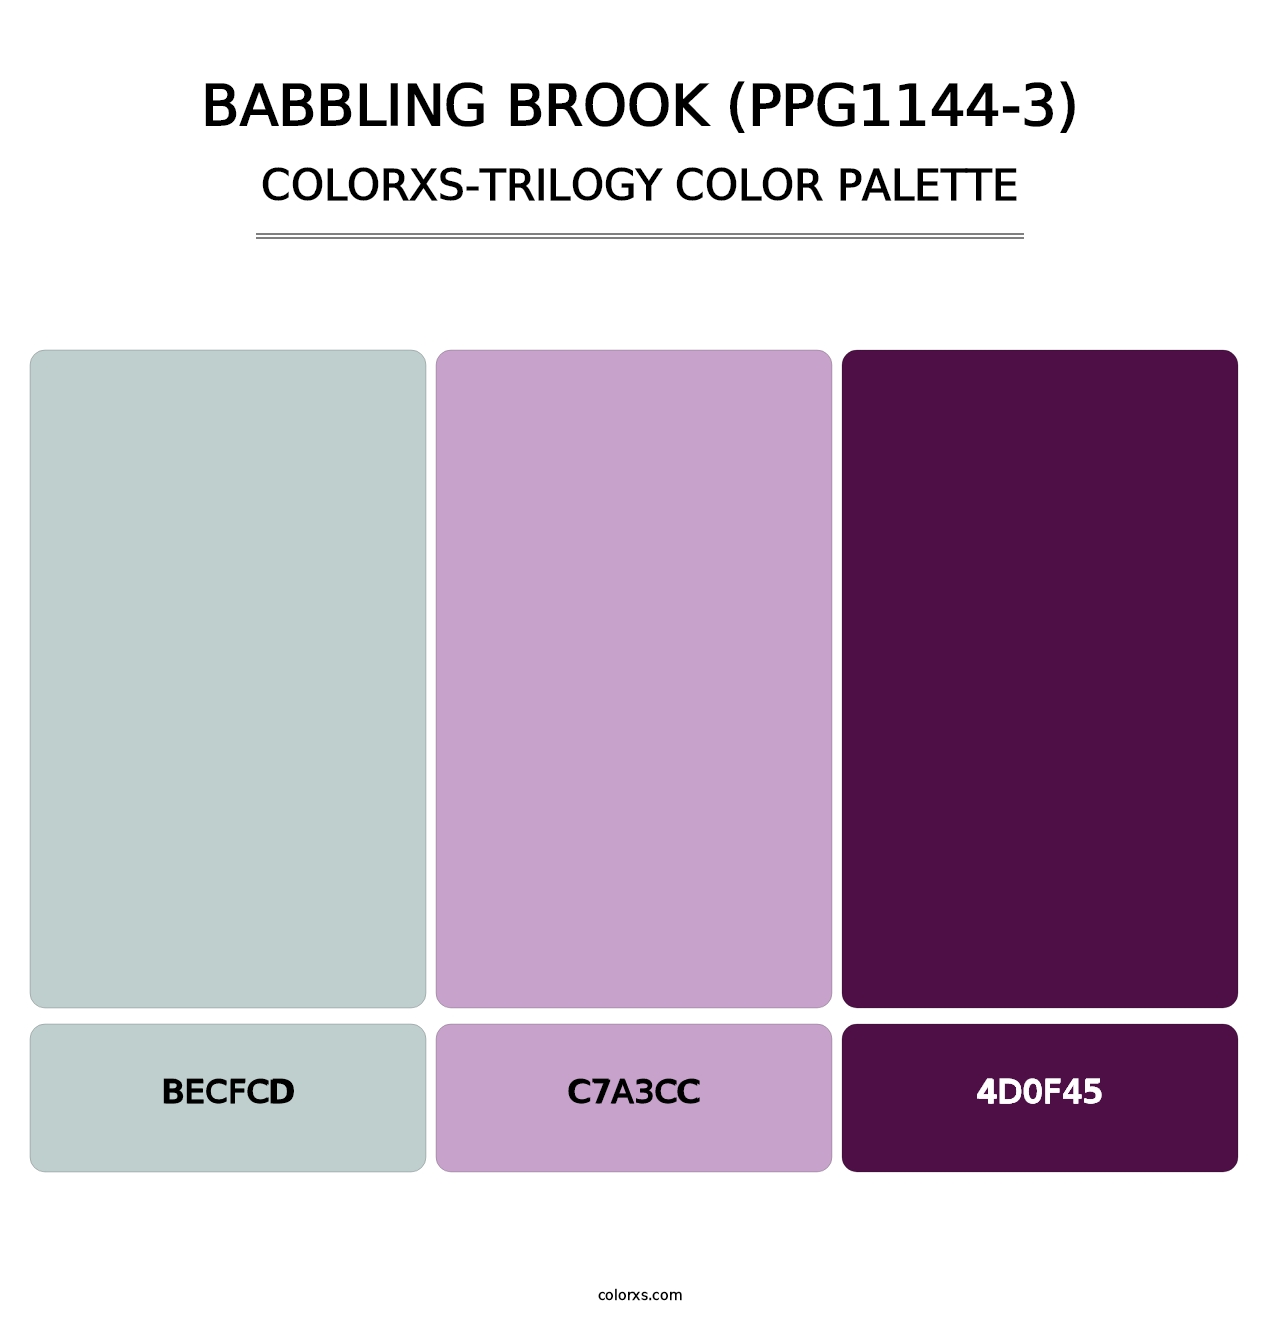 Babbling Brook (PPG1144-3) - Colorxs Trilogy Palette